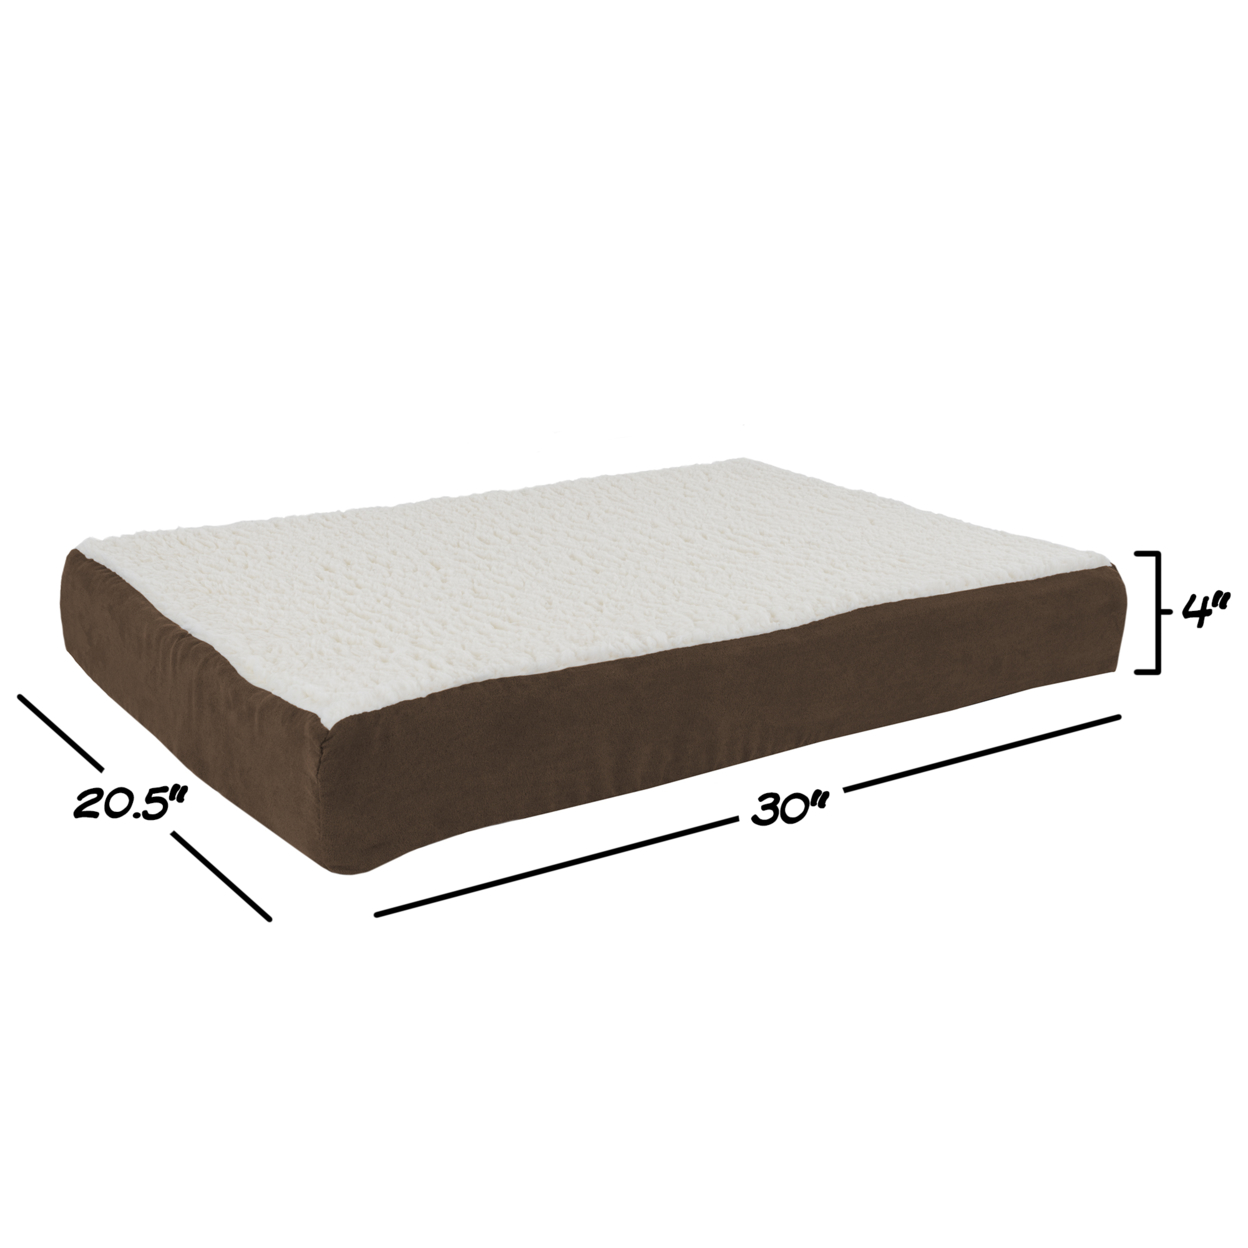 Orthopedic Sherpa Top Pet Bed With Memory Foam And Removable Cover 30 X 20 X 4 Brown Medium